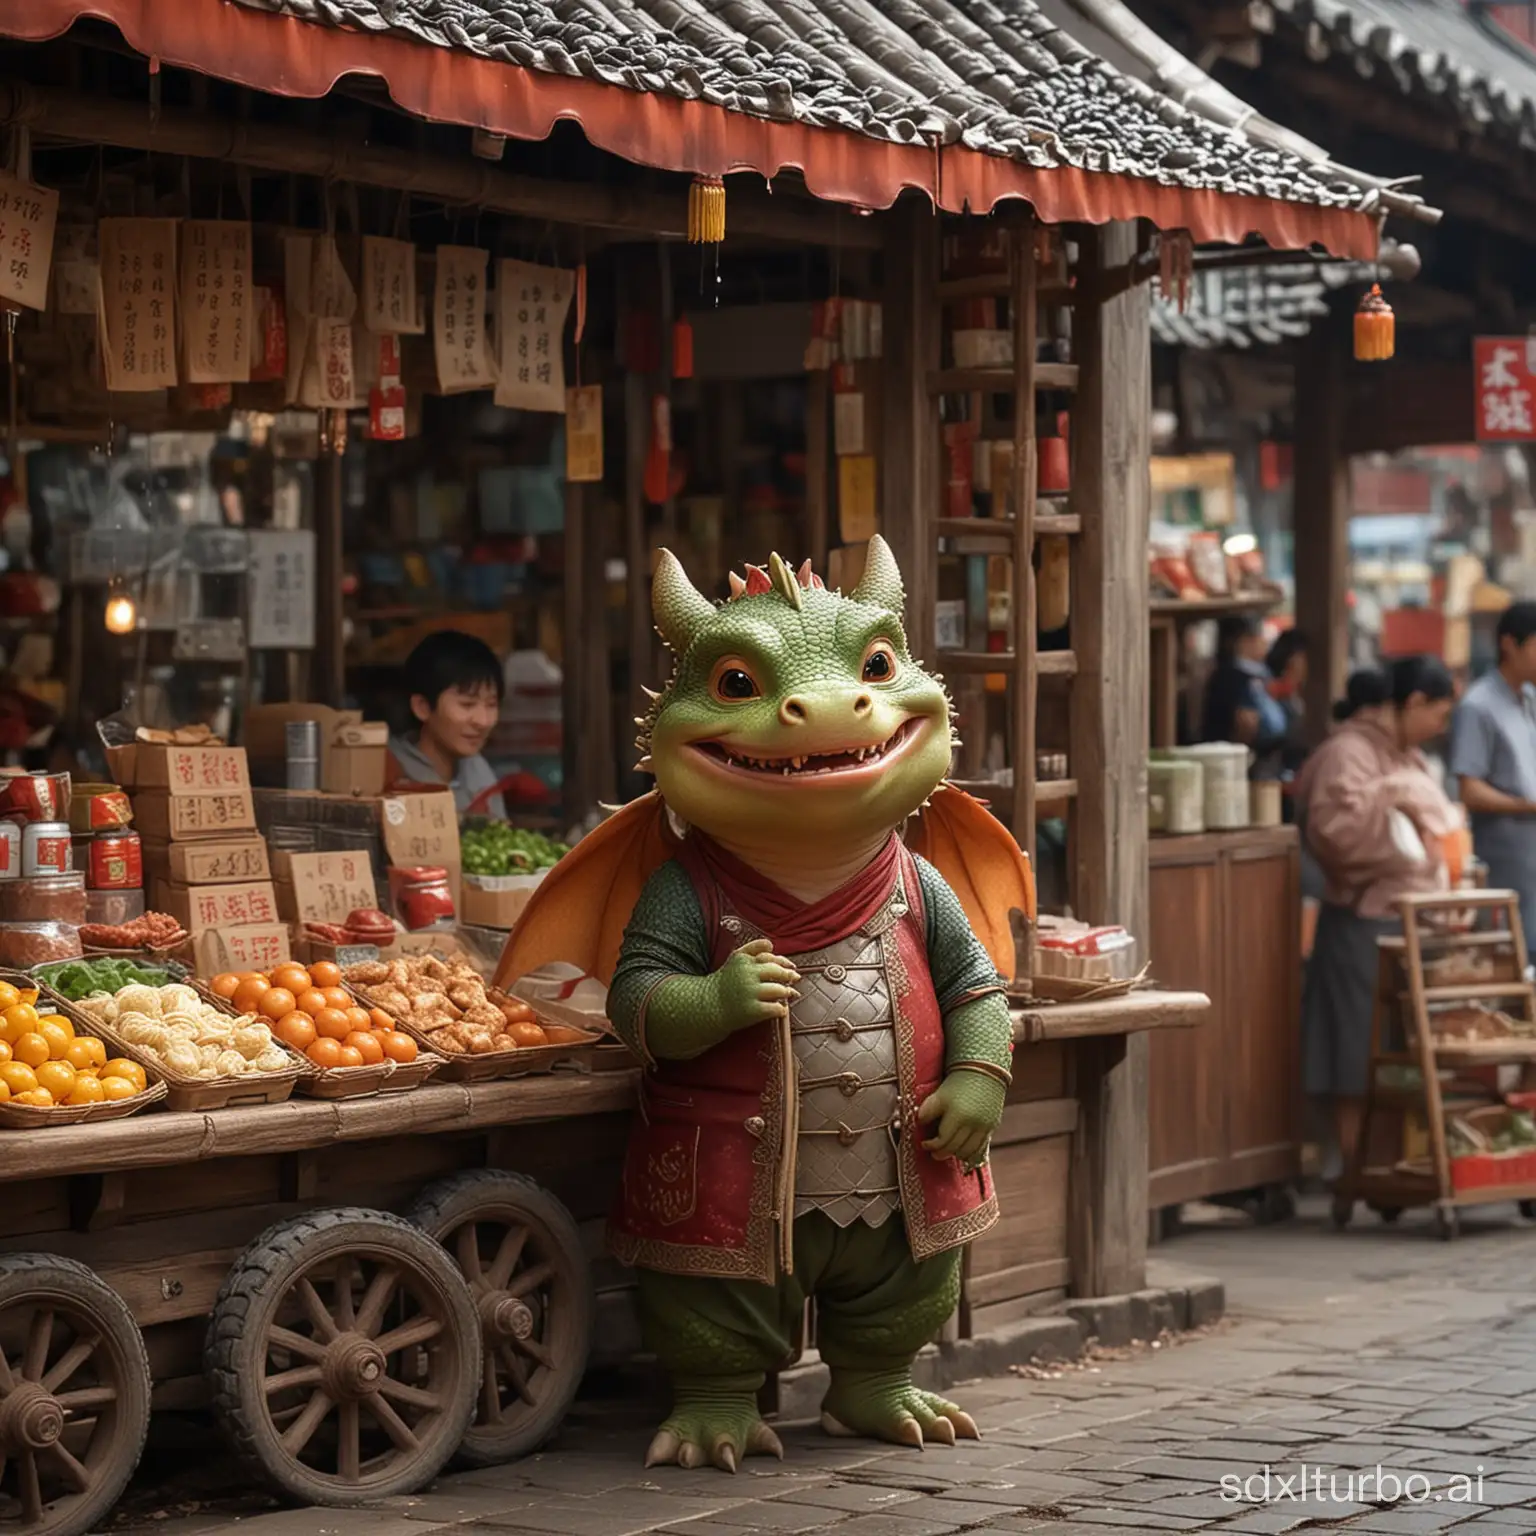 The little dragon is an animal with short wings, chubby and cute and charming

Act IV: Success and Expansion

Successful Transitions:

Scene: In front of Xiaolong's stall, a long line of customers waiting. He was busy making good food, sweat dripping from his forehead.

Emotion: A successful smile on the face, pride and satisfaction in the eyes.